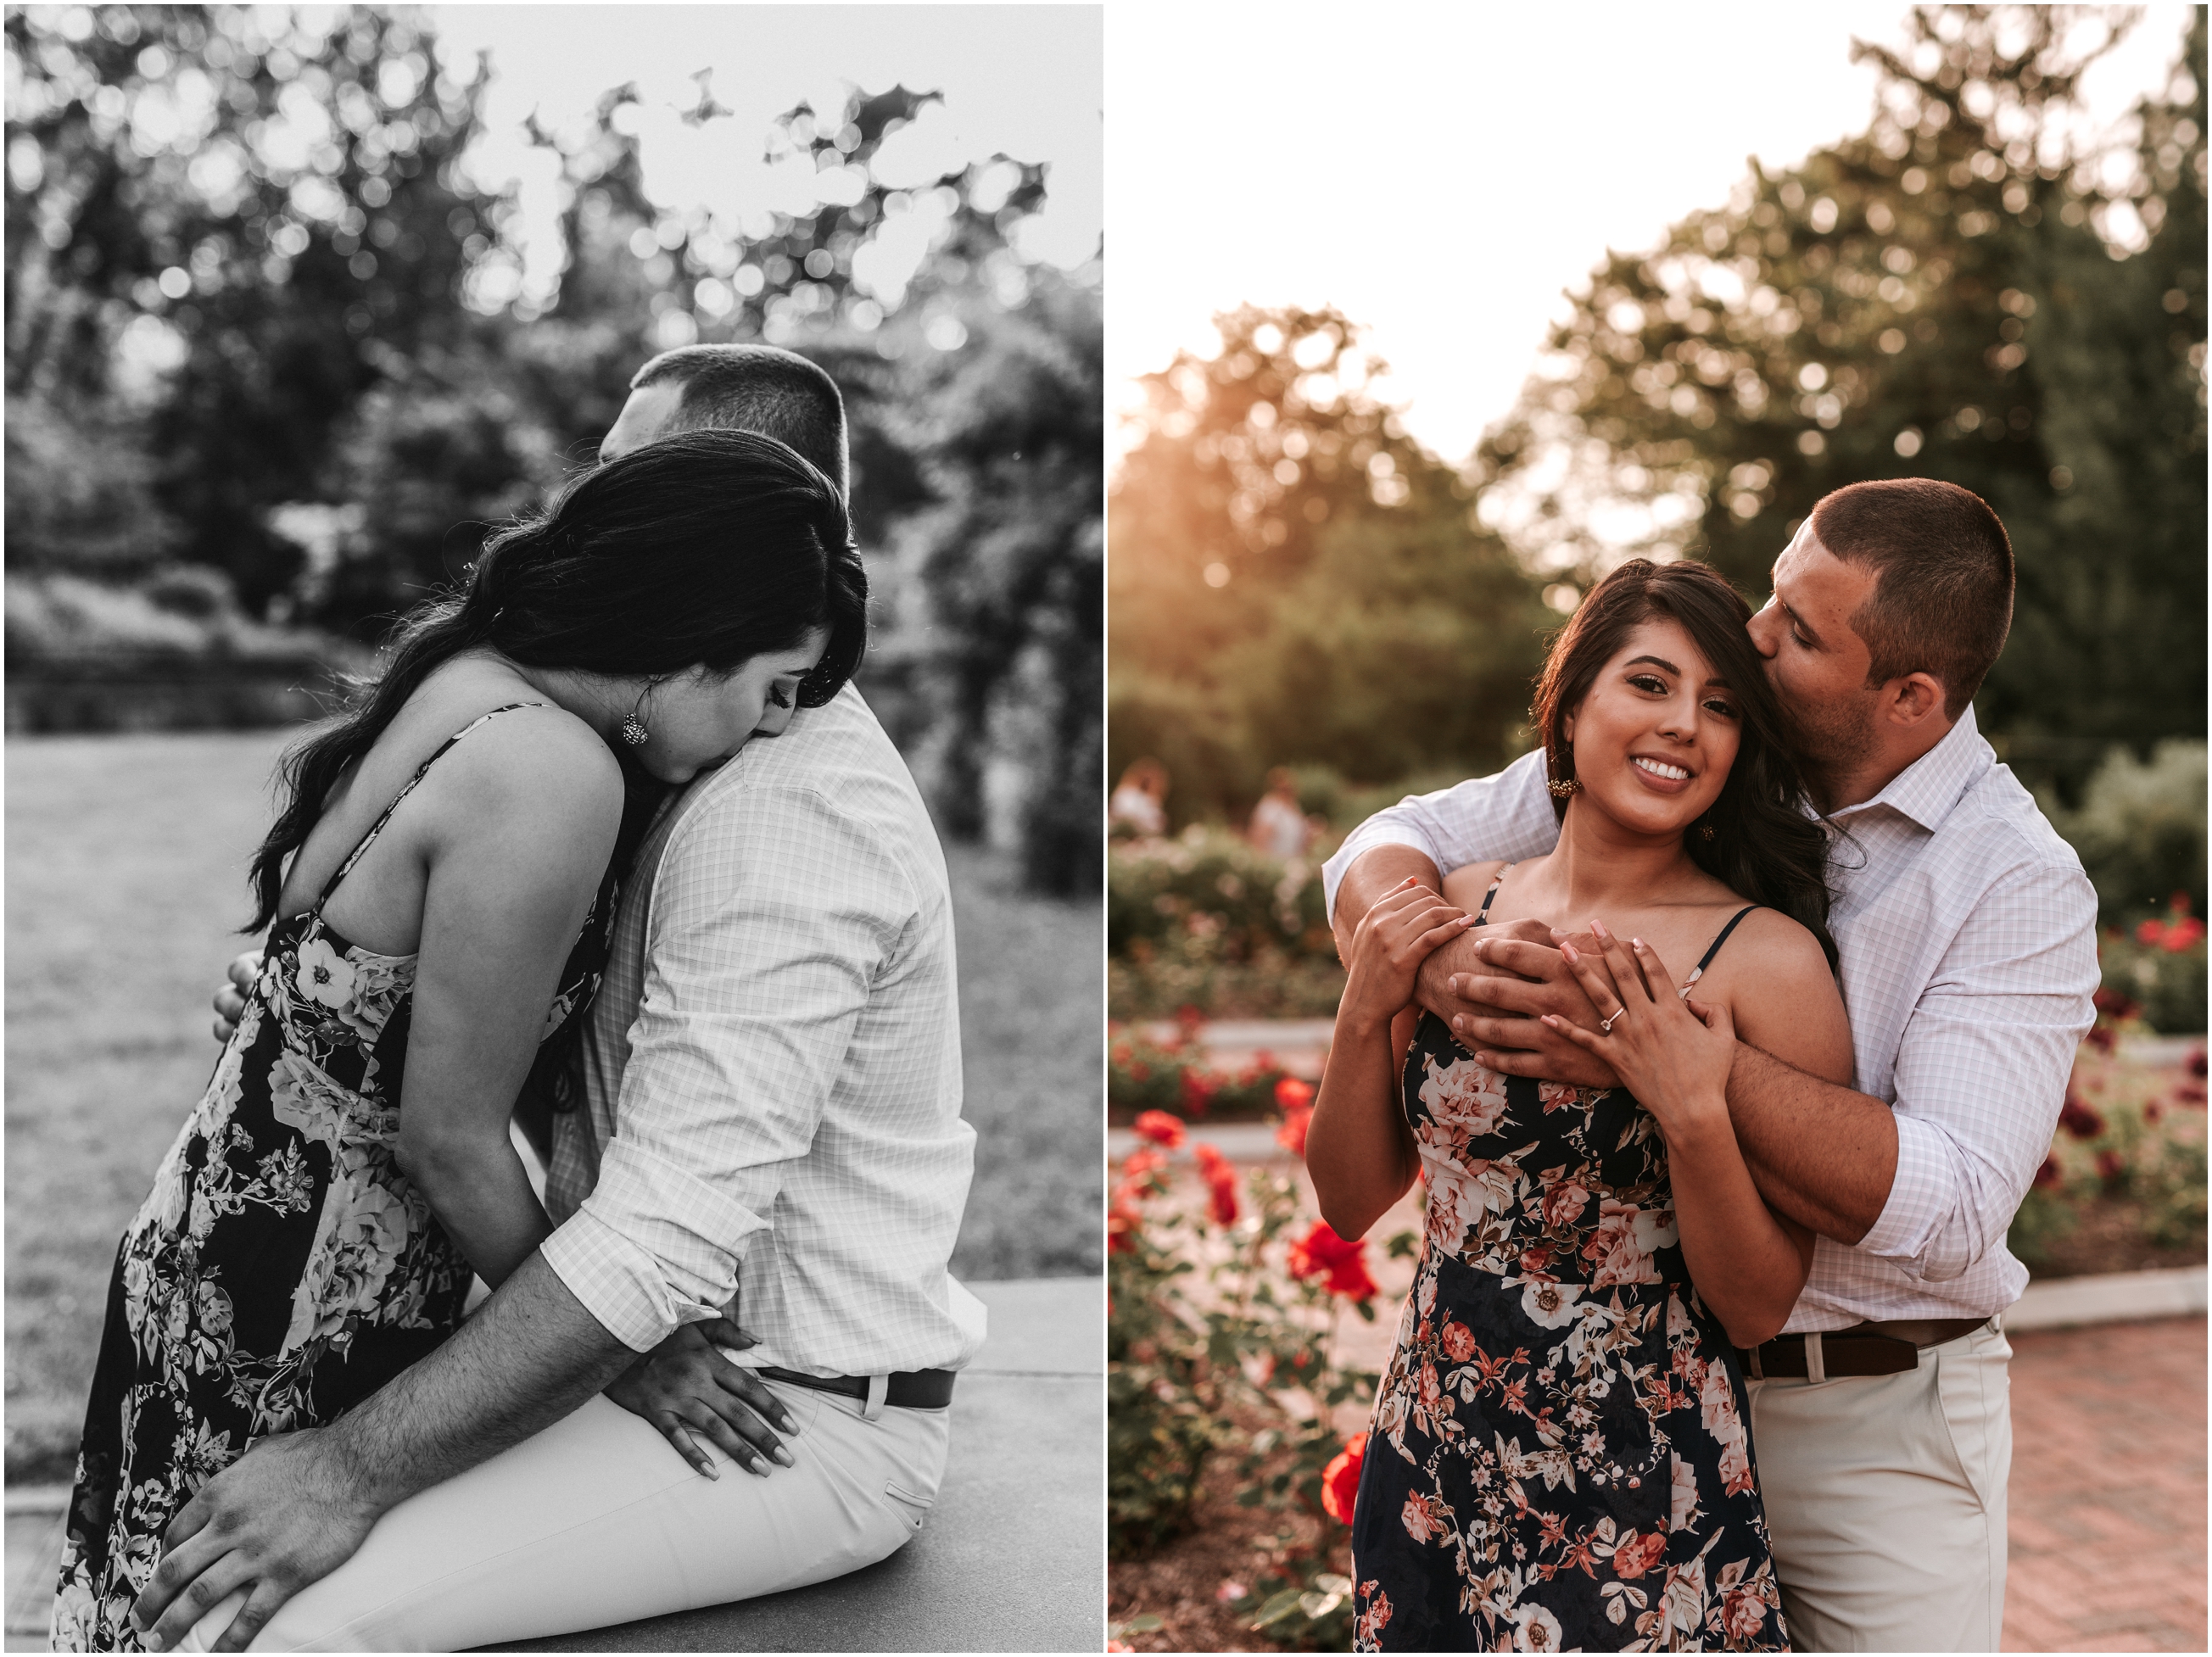 Tatiana and Ronald’s Colonial Park Engagement Session was all sorts of perfect from the blooming rose garden to their adorable pups, & ! Look at those mushy faces!!! They were SO excited for their modeling gig; we had to bribe them with snacks to keep there attention on the camera, but hey, they’re pretty cute so we will cut them some slack for looking all over the place. :) Tati and Ronald were up for anything, and kept me laughing the entire shoot! We found the cutest little cottage house that I just couldn’t get enough of before we headed over into the rose garden. It was such a beautiful pathway full of different kinds of roses all labeled with unique names (one kind was named Dolly Partons, haha!) These high school sweethearts met during the last few days of Tati’s sophomore year and Ronald’s freshman year. They lived in different towns, so they had never met before until the day that Tati was at her locker with a friend and noticed him walking by. She thought he was very good looking, so she asked her friend what she knew about him and that was it. She, unexpectedly, got a friend request from him on Facebook (She later ended up finding out he had been asking his friends who she was, too)! They became friends, and although school ended in June, they just kept on messaging on Facebook. They ended up dating for a whole 3 weeks when school started back in Semptember, but they broke up soon after. Life happened for nine months and there was no communication between them until out of the blue, they ended up attending the same church! From there, their love story officially began. They have been together for almost 6 years now, and Tati says, “We have grown up together from immature 15 year olds to adults.There have been highs and lows, like any relationship, but thankfully, we have been able to fight through.”   When I asked about how Ronald proposed, Tati told me, “So Ronald proposed on August 12th 2017. It was a complete surprise for me. On that day, I was told by my parents that we had a family dinner to go to, which they had to beg me to go to. I got ready even though all I wanted to do was stay at home and watch movies. On our way to the “family dinner,” my dad stopped at my pastor’s house. We went inside and to the backyard where all my friends and family were. There was a big screen with petals all on the grass. When I entered the backyard, I knew what was happening. A video started playing and it was Ronald speaking about our relationship. In the video, he had most of the gifts I had given him for our anniversary’s. When the video ended he asked me to marry him and I said YES, of course!” How adorable and romantic to be surrounded by all of their loved ones for such a special moment!! <3 Tatiana and Ronald, thank you both so much for sharing your story with me and for being so amazing to hang out with! I absolutely loved capturing this milestone in your lives, and I can’t wait for your big day next May!!! Xoxo